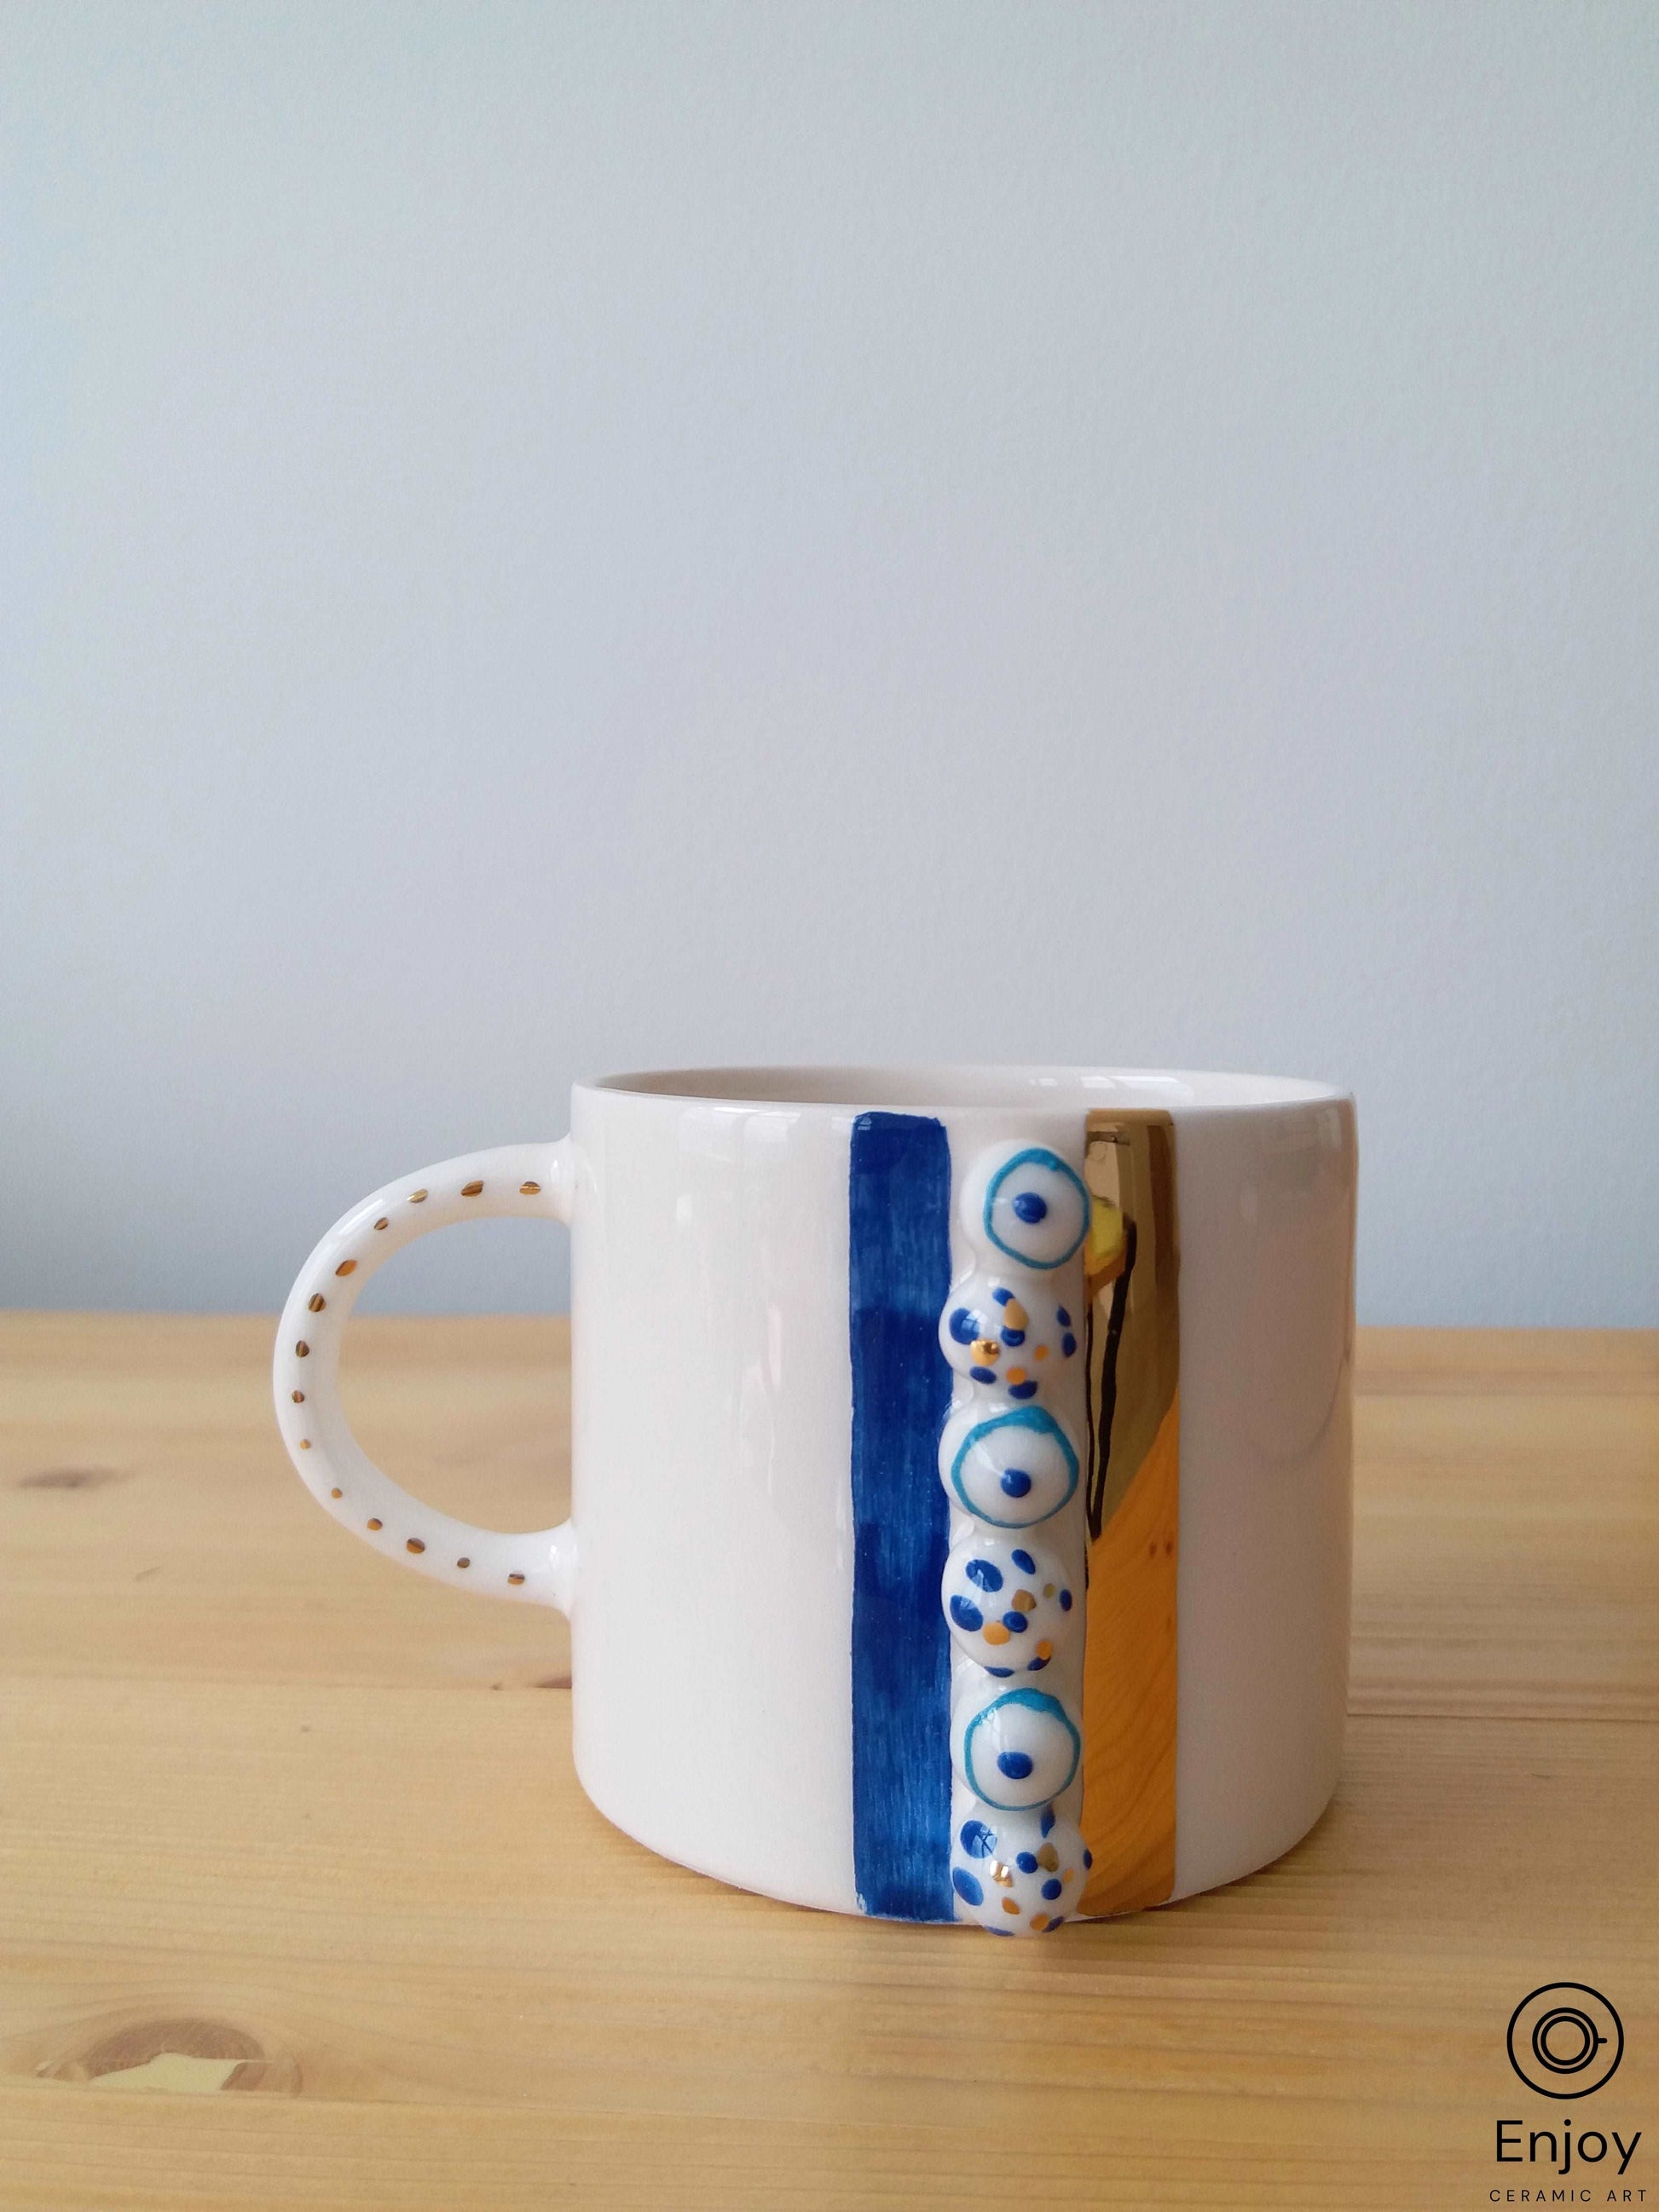 A white ceramic mug with a polished golden handle, detailed with a vertical strip of blue and white evil eye motifs, standing on a wooden surface against a neutral light blue background.